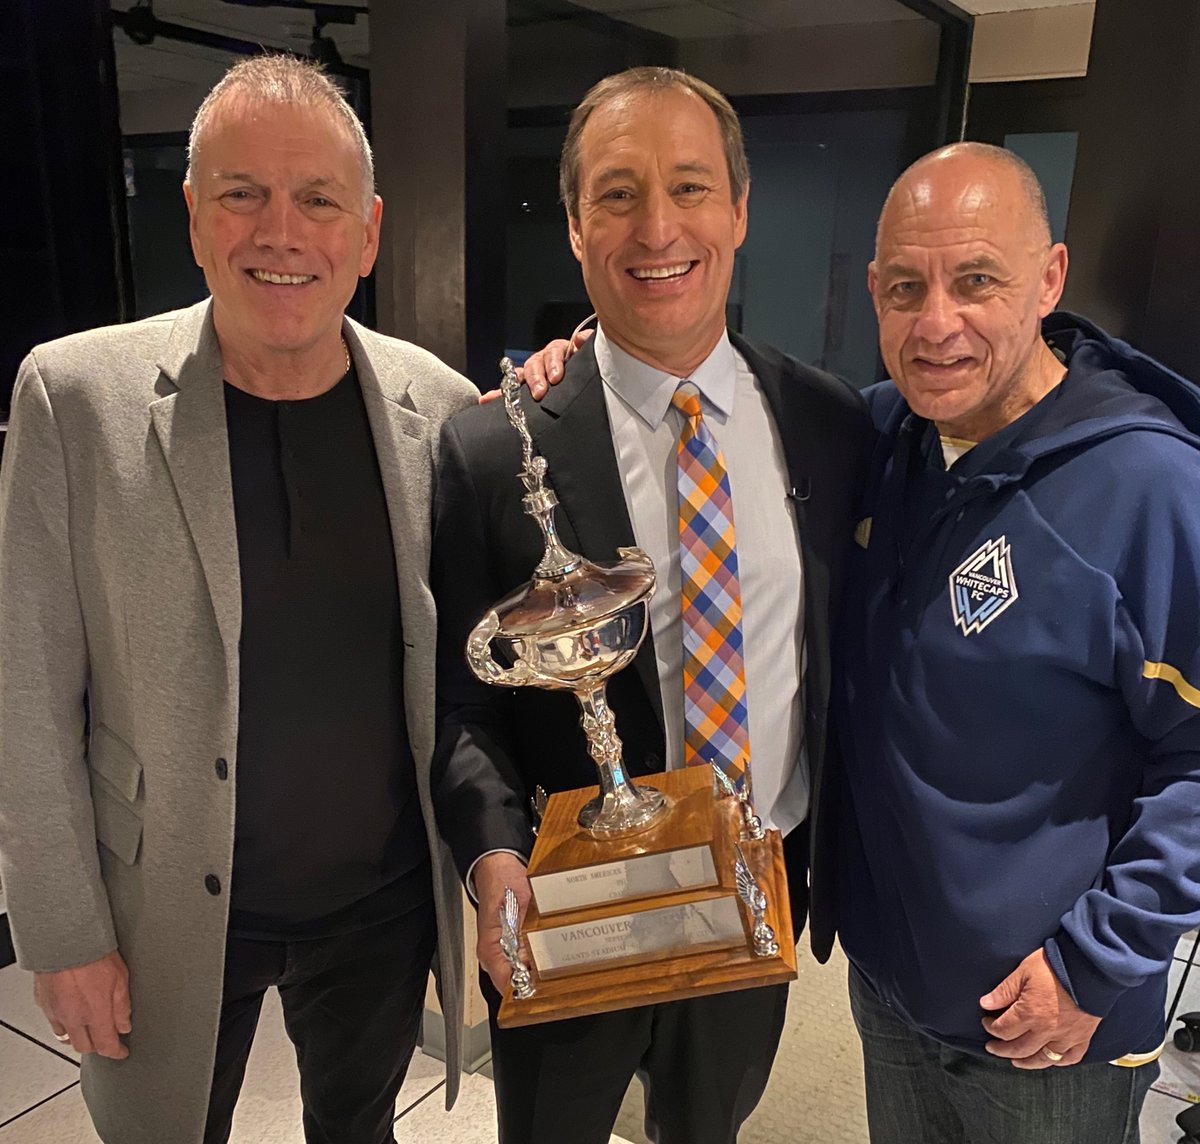 What a morning here @GlobalBC! Two Vancouver Whitecaps legends, and me in the middle proudly holding the 1979 NASL Championship Trophy. First 'Caps game 50 years ago. @WhitecapsFC @JayJanower ⚽️👍